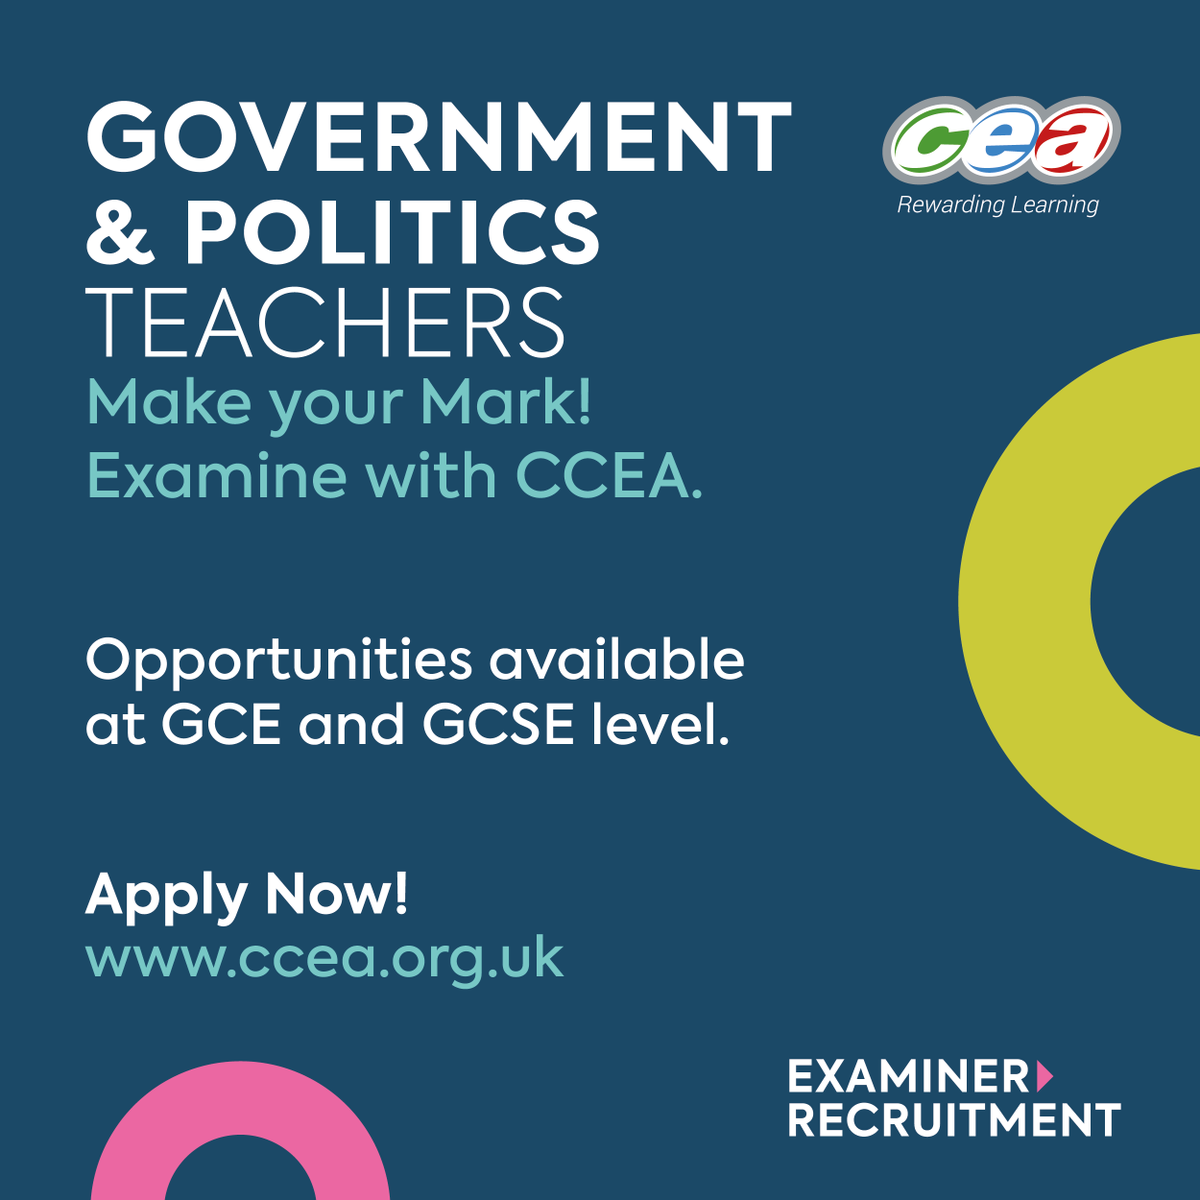 ️📣Attention, do you have at least 1 yrs experience teaching Gov & Pol at either GCE or GCSE? Interested in becoming and examiner with us? For more info visit: ow.ly/WFq150RePyt